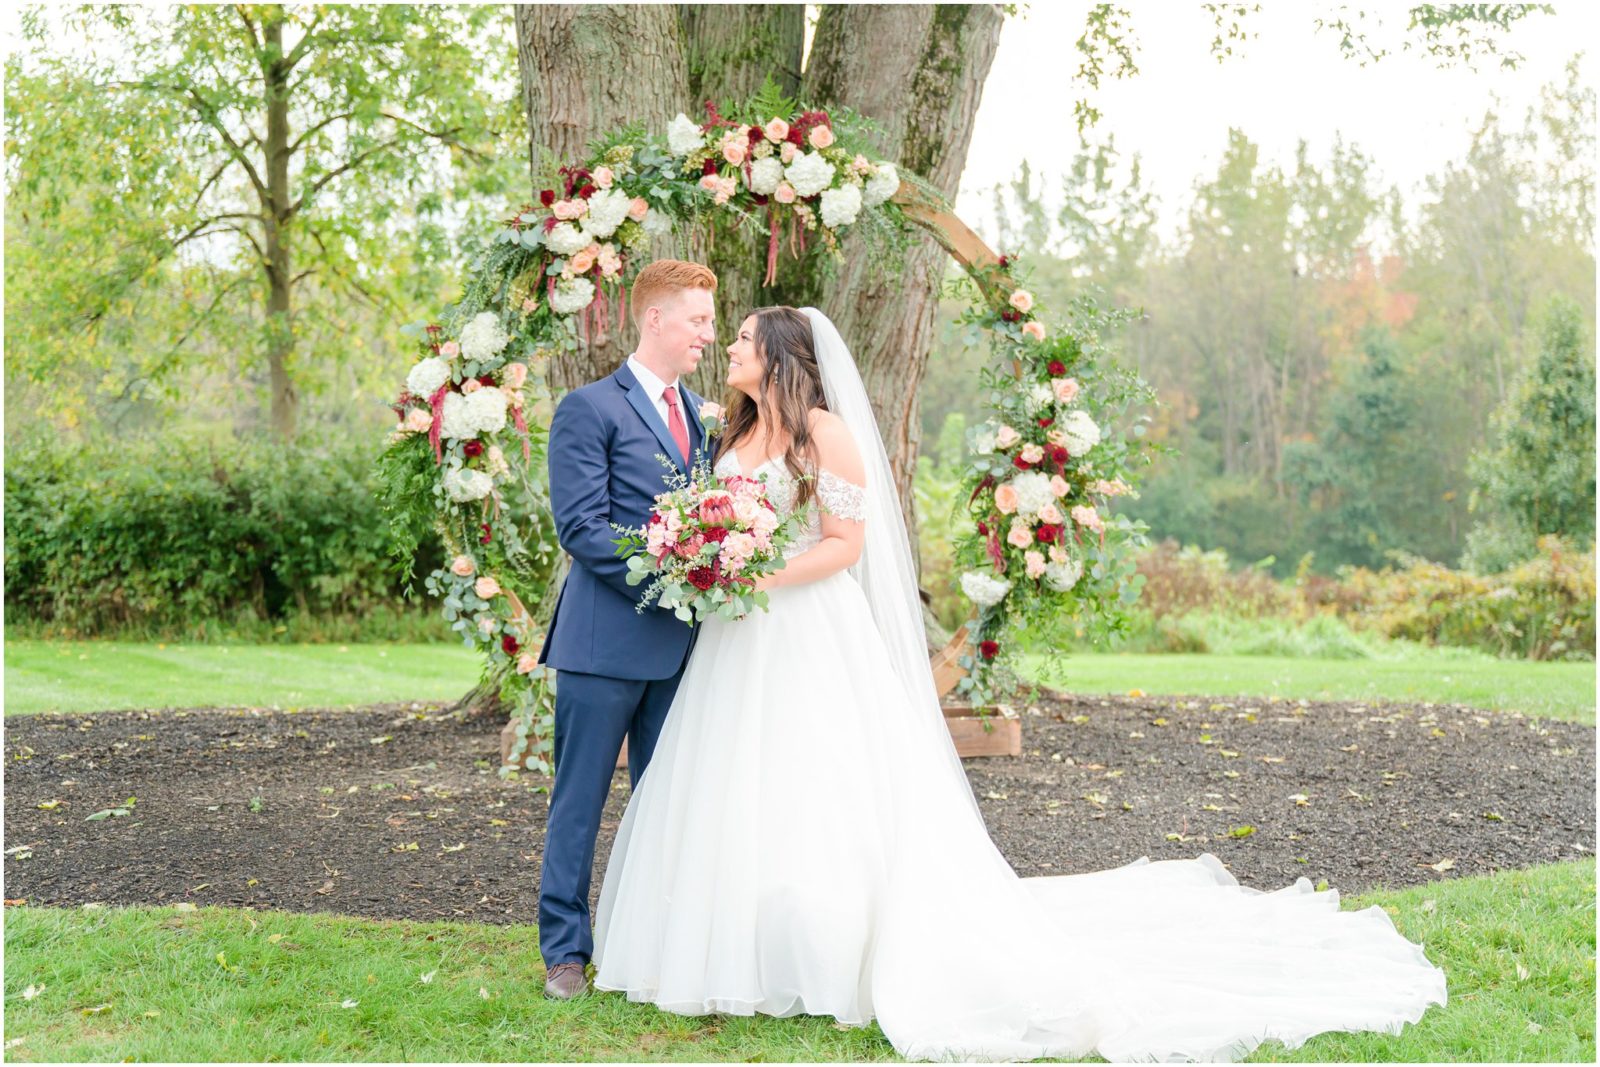 Bride and groom smiling at each other in front of floral arch Mustard Seed Gardens wedding